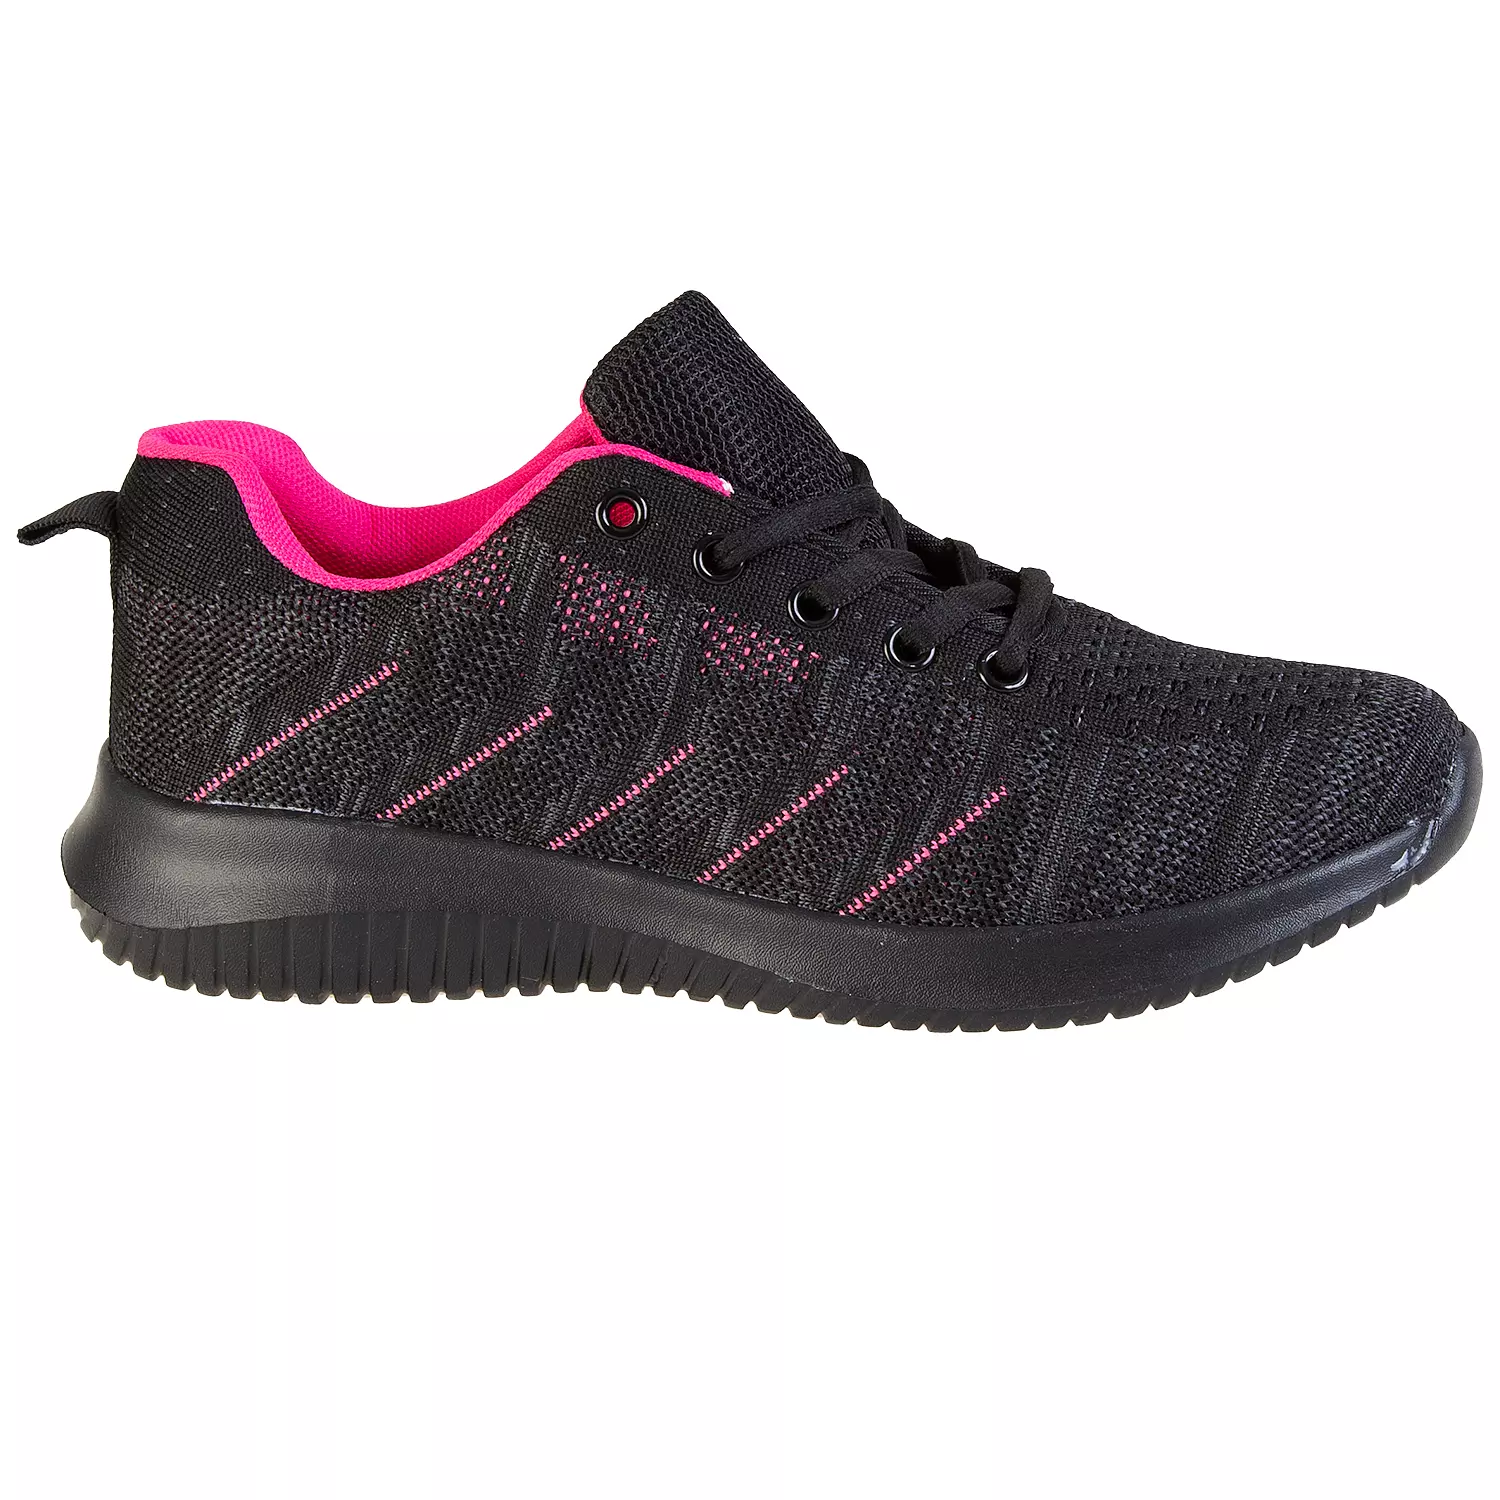 Women's 2-toned Flyknit, lace-up sports shoes, black/pink, size 6